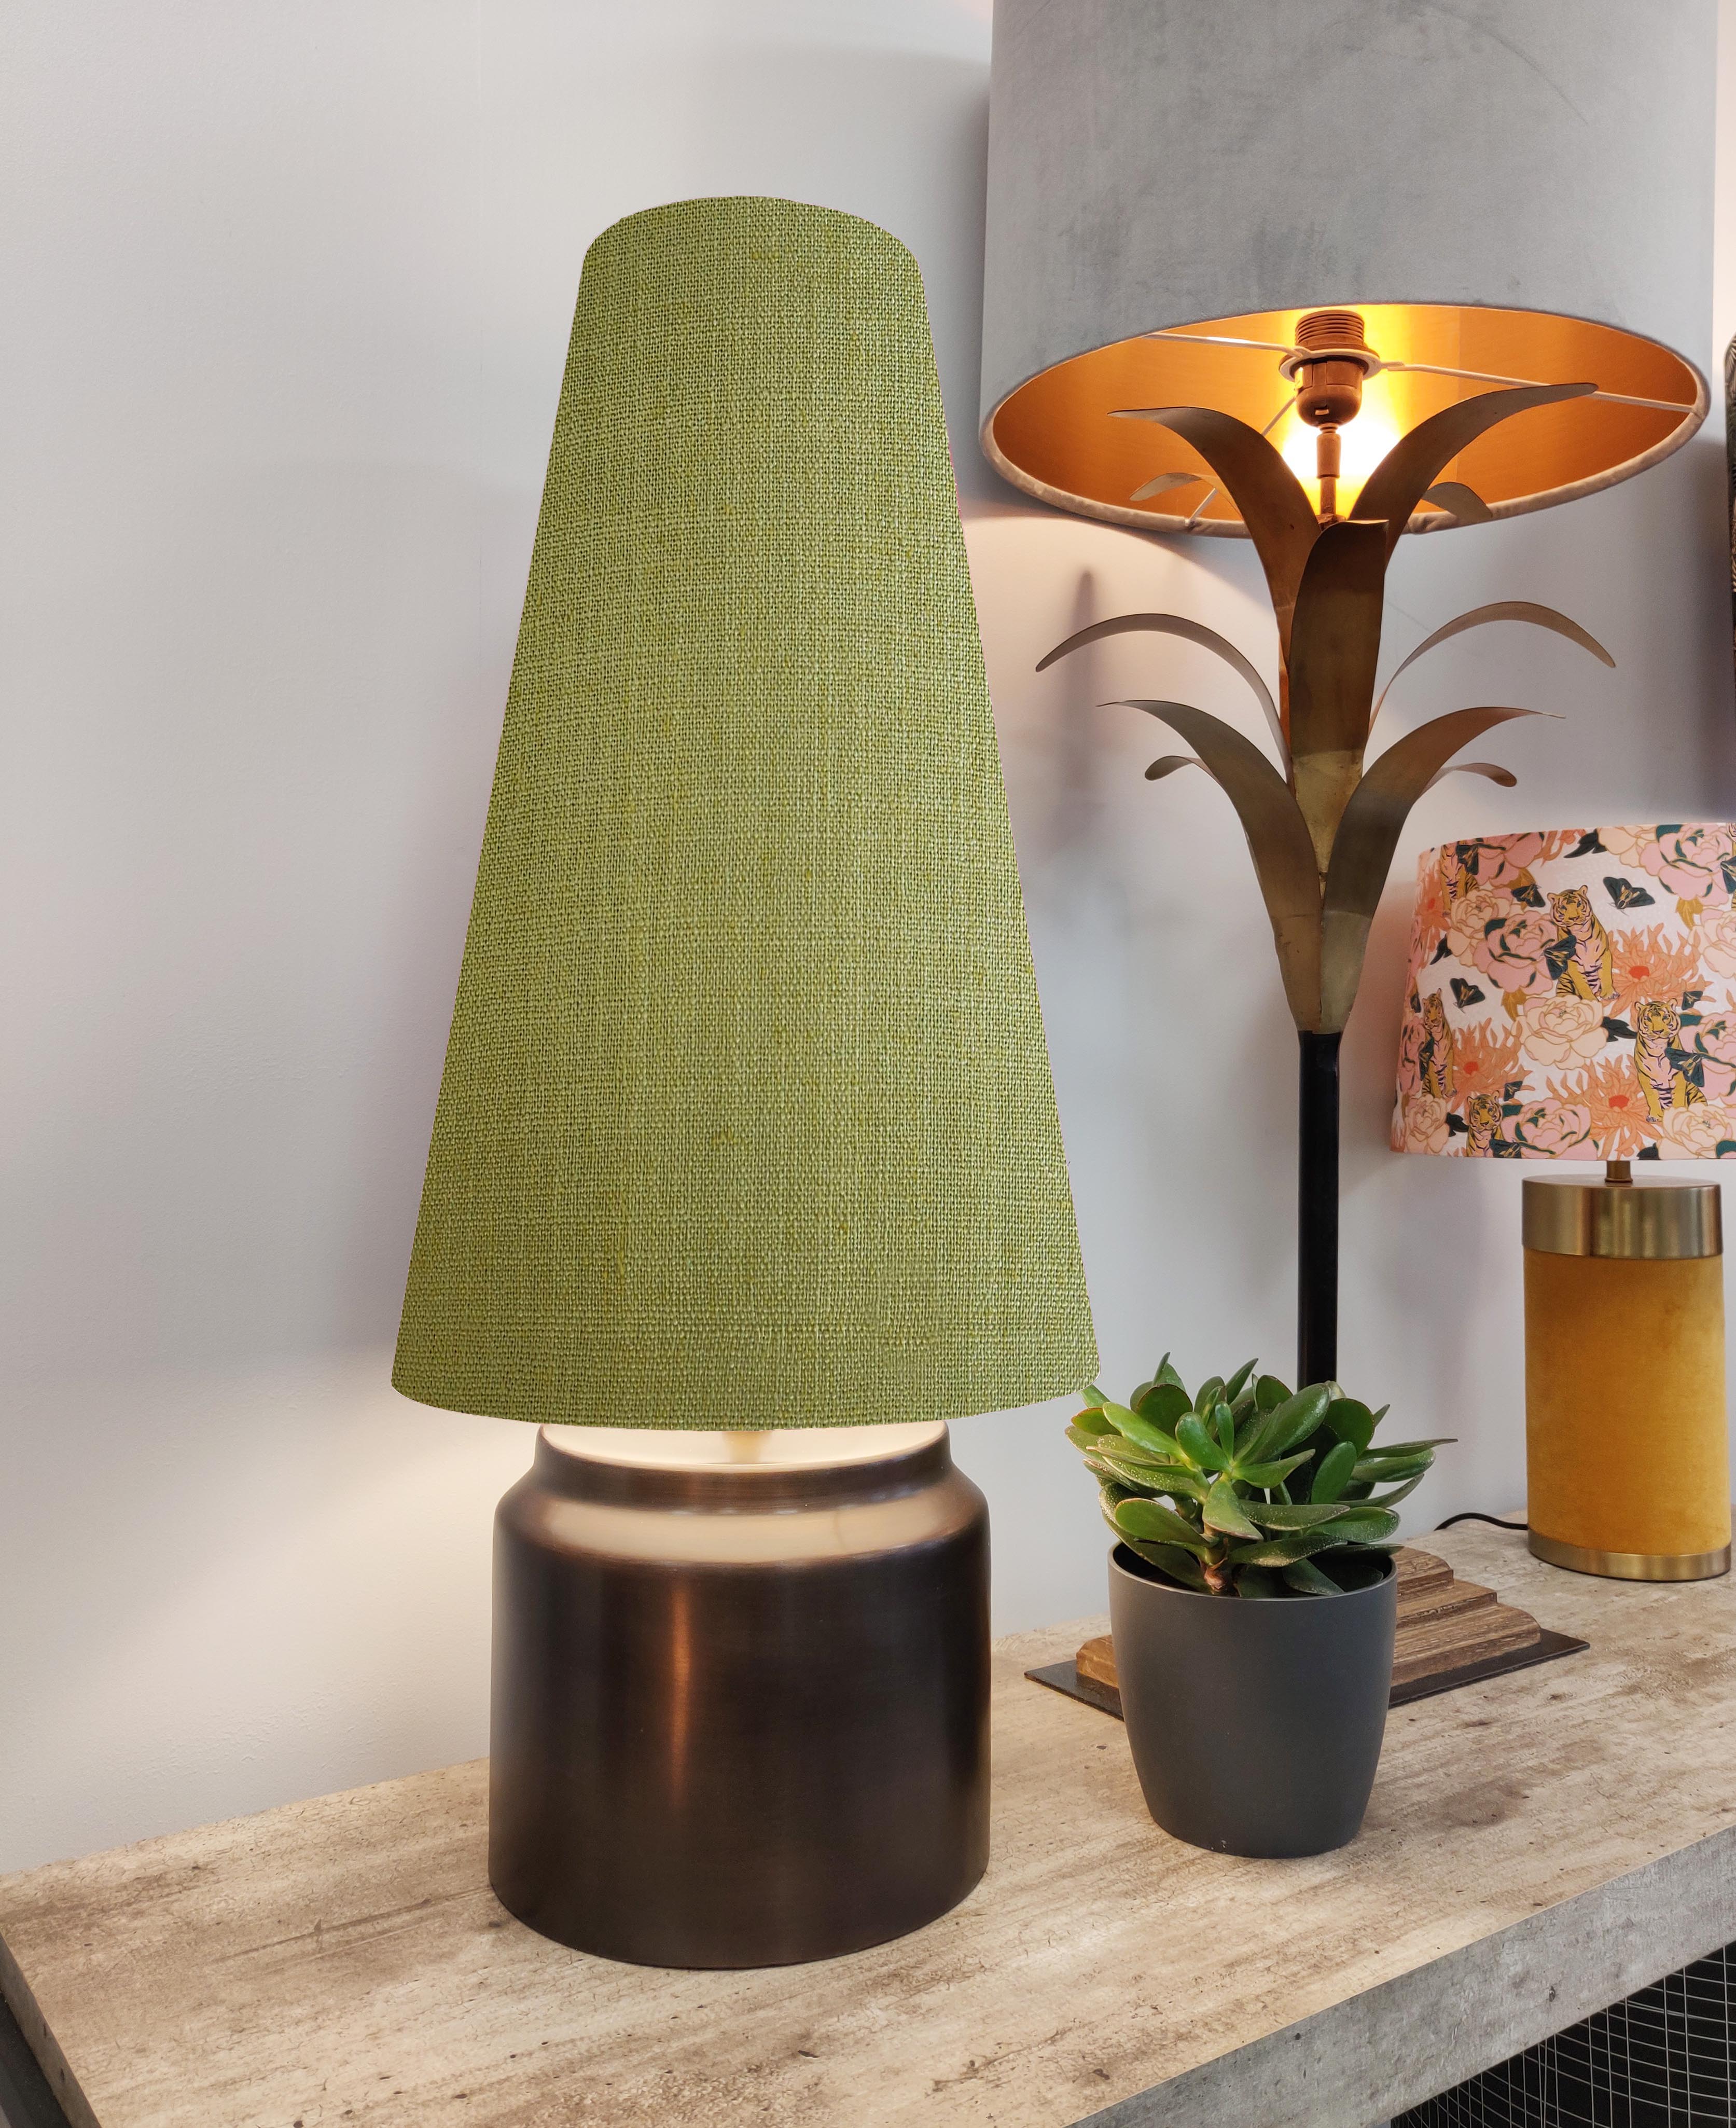 Extra Tall Fern Green Linen Lampshade in a Conical Cone Design